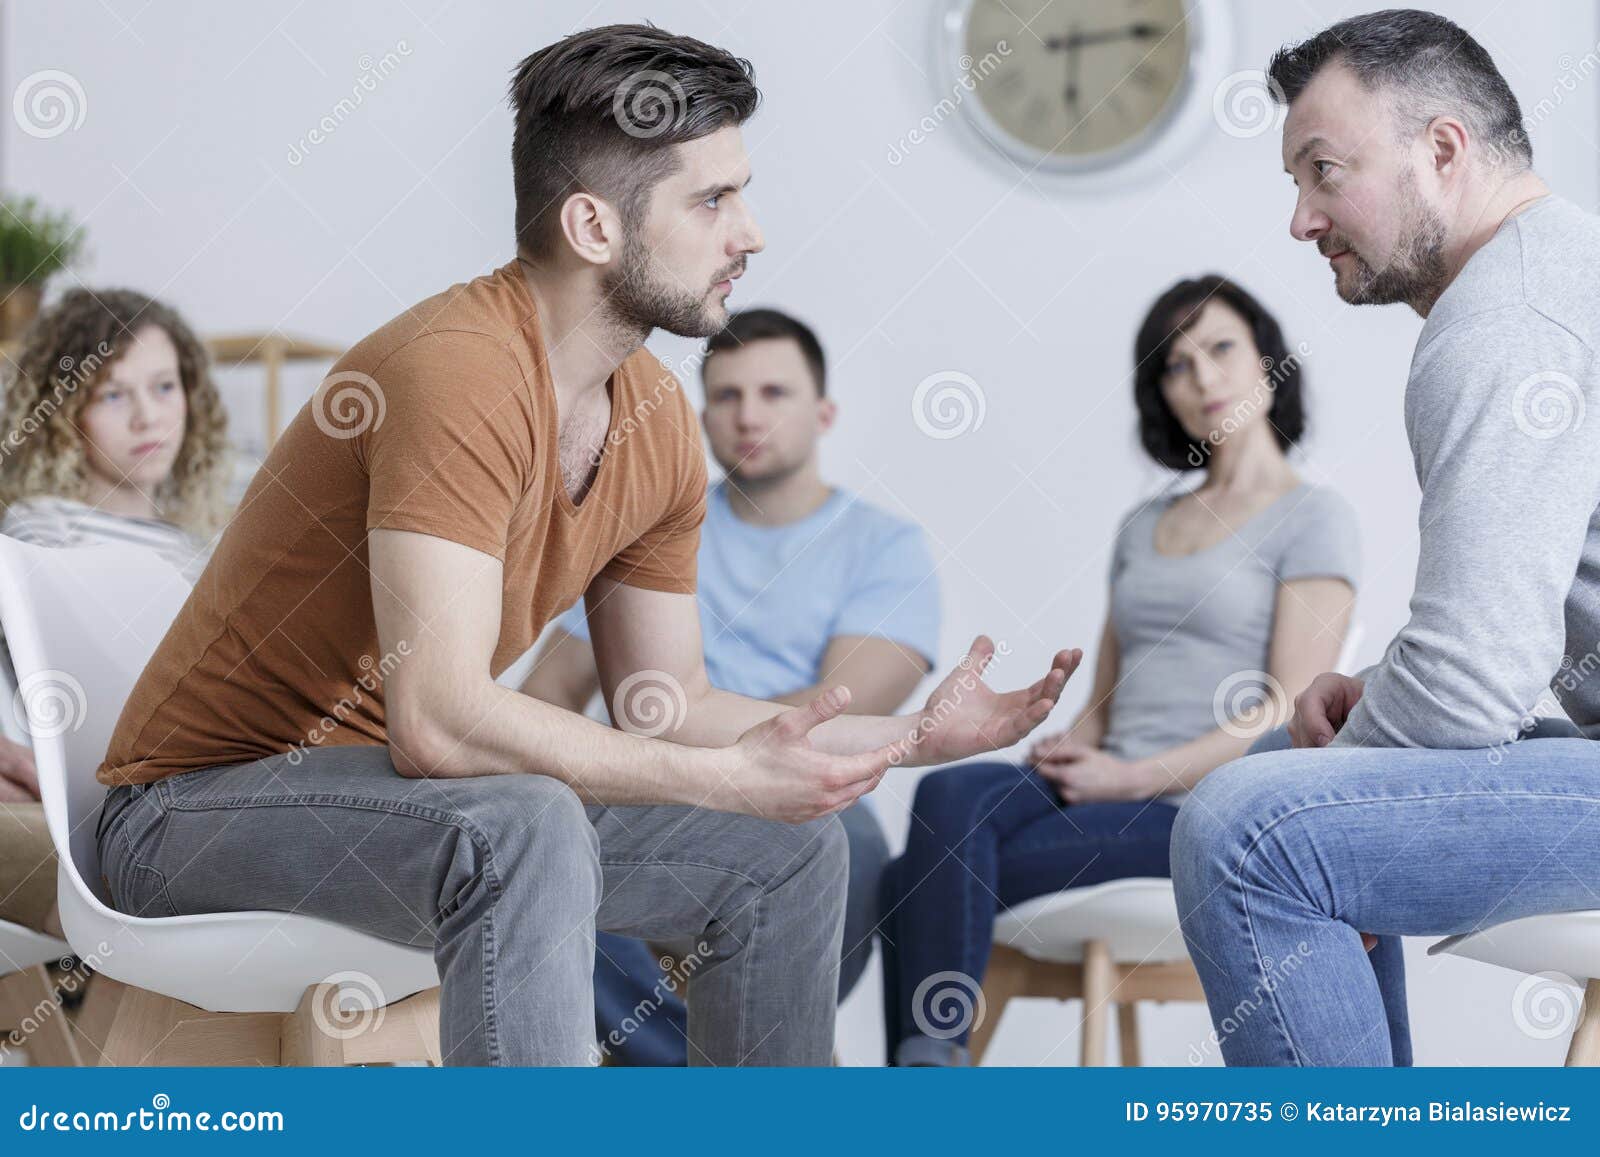 Role playing game hi-res stock photography and images - Alamy